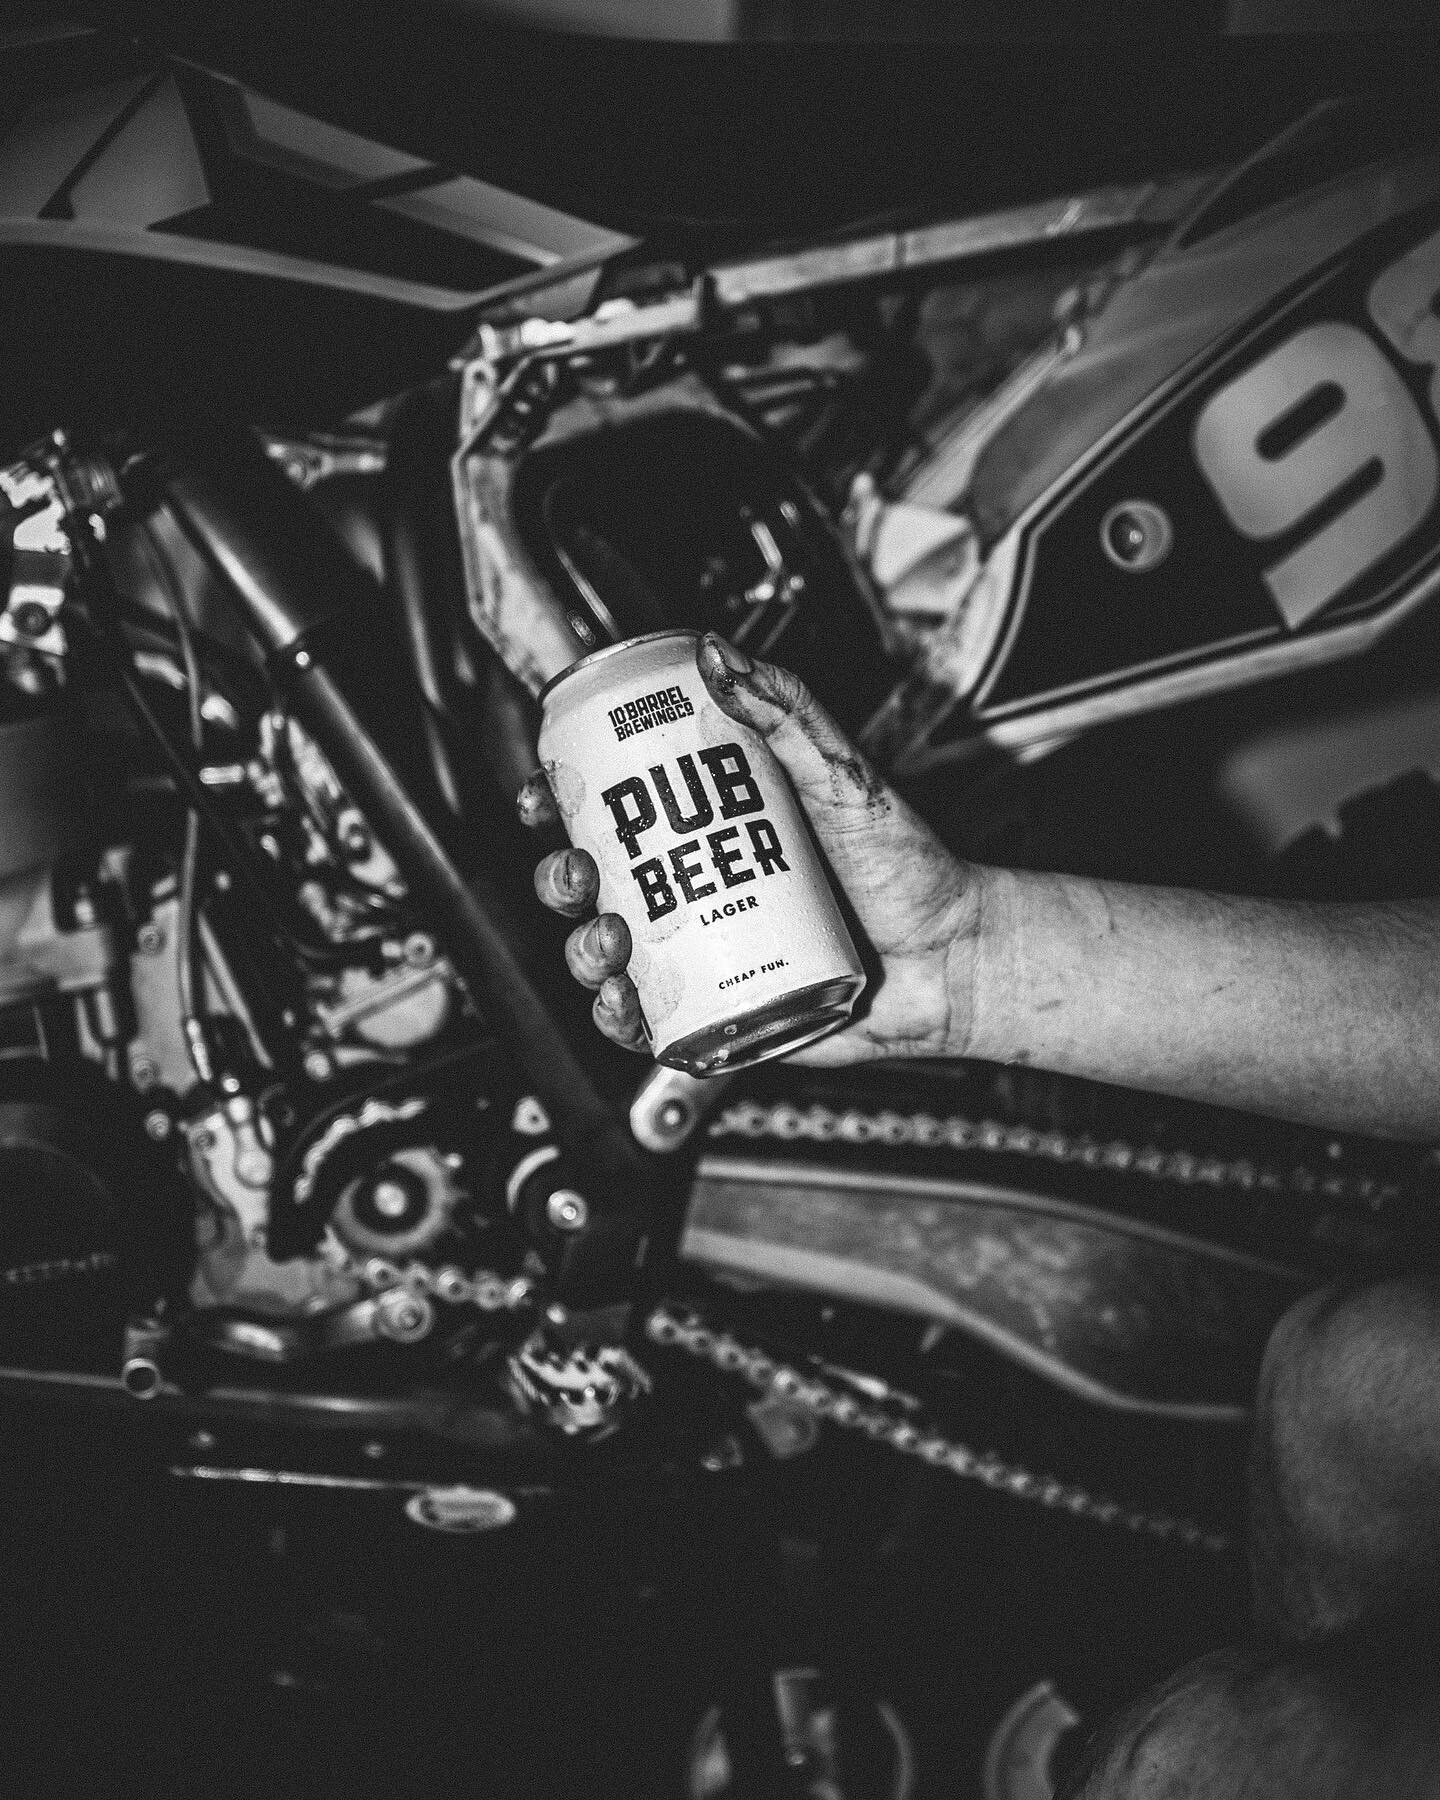 Who&rsquo;s slamming greasy garage pubbies this week in order to get shit ready for the weekend? We certainly are.

#cheapfunbeer